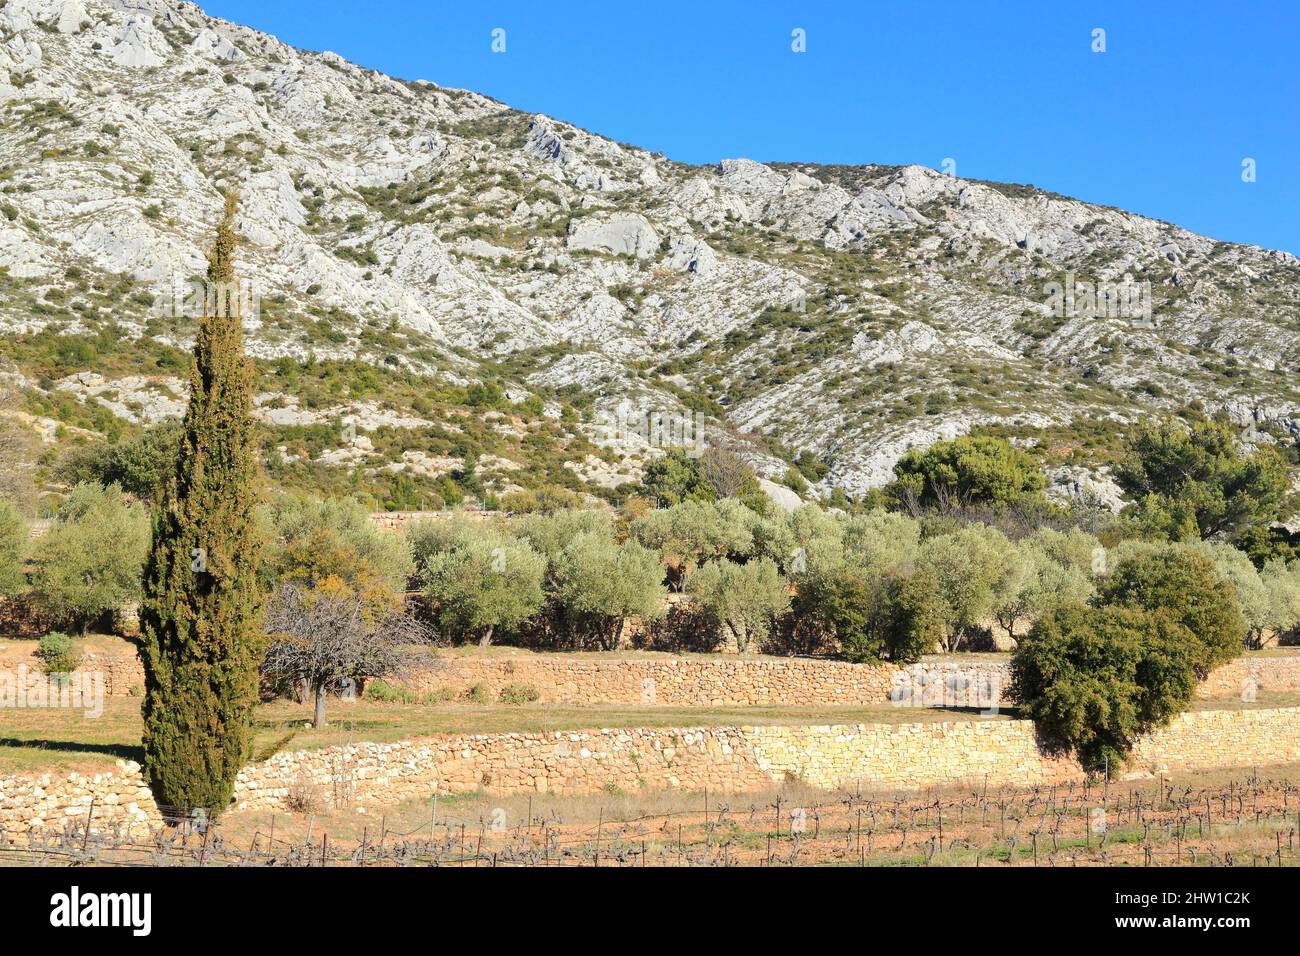 France, Bouches du Rhone, Grand Site Concors Sainte Victoire, Puyloubier, Saint Ser wine estate, vineyard and cypresses with the Sainte Victoire mountain in the background Stock Photo